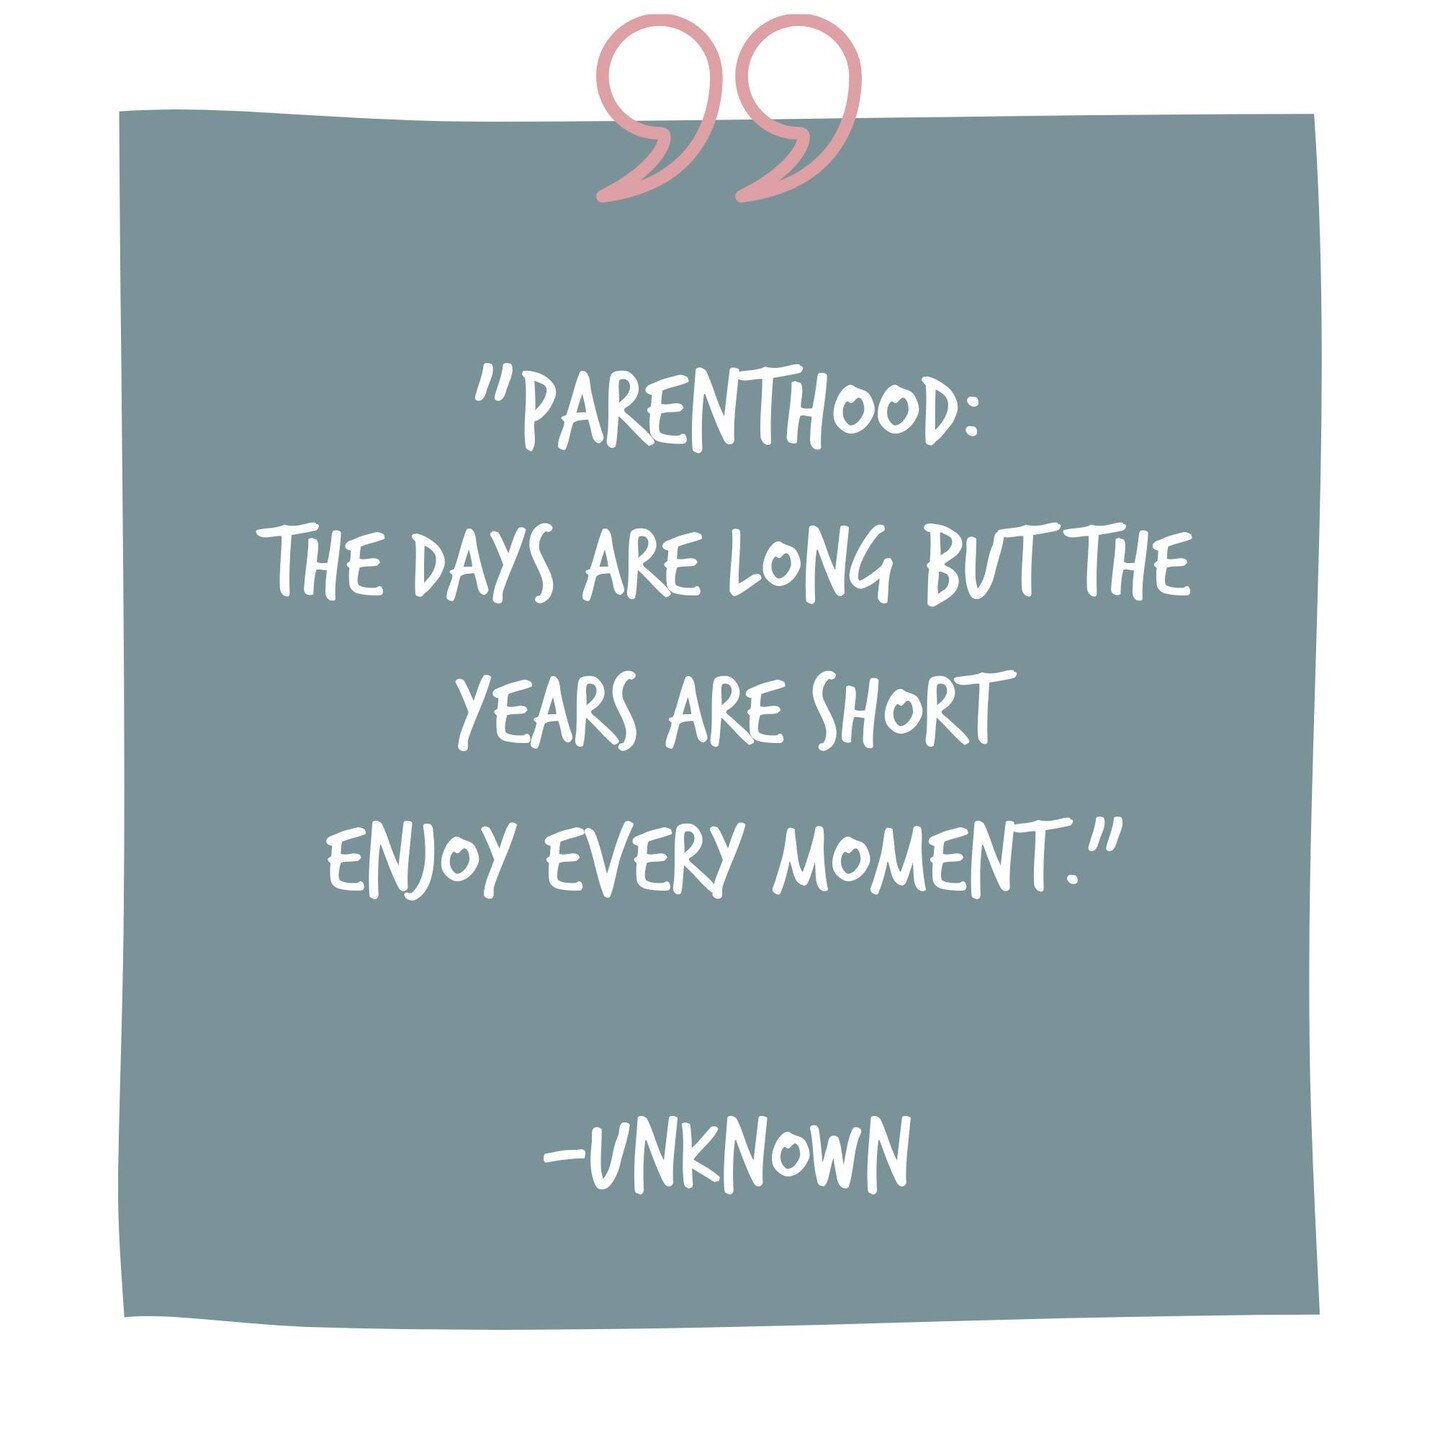 Time goes by so quickly, enjoy every precious moment.⁠
🥰❤️😍⁠
⁠
- Love Mom XXX⁠
⁠